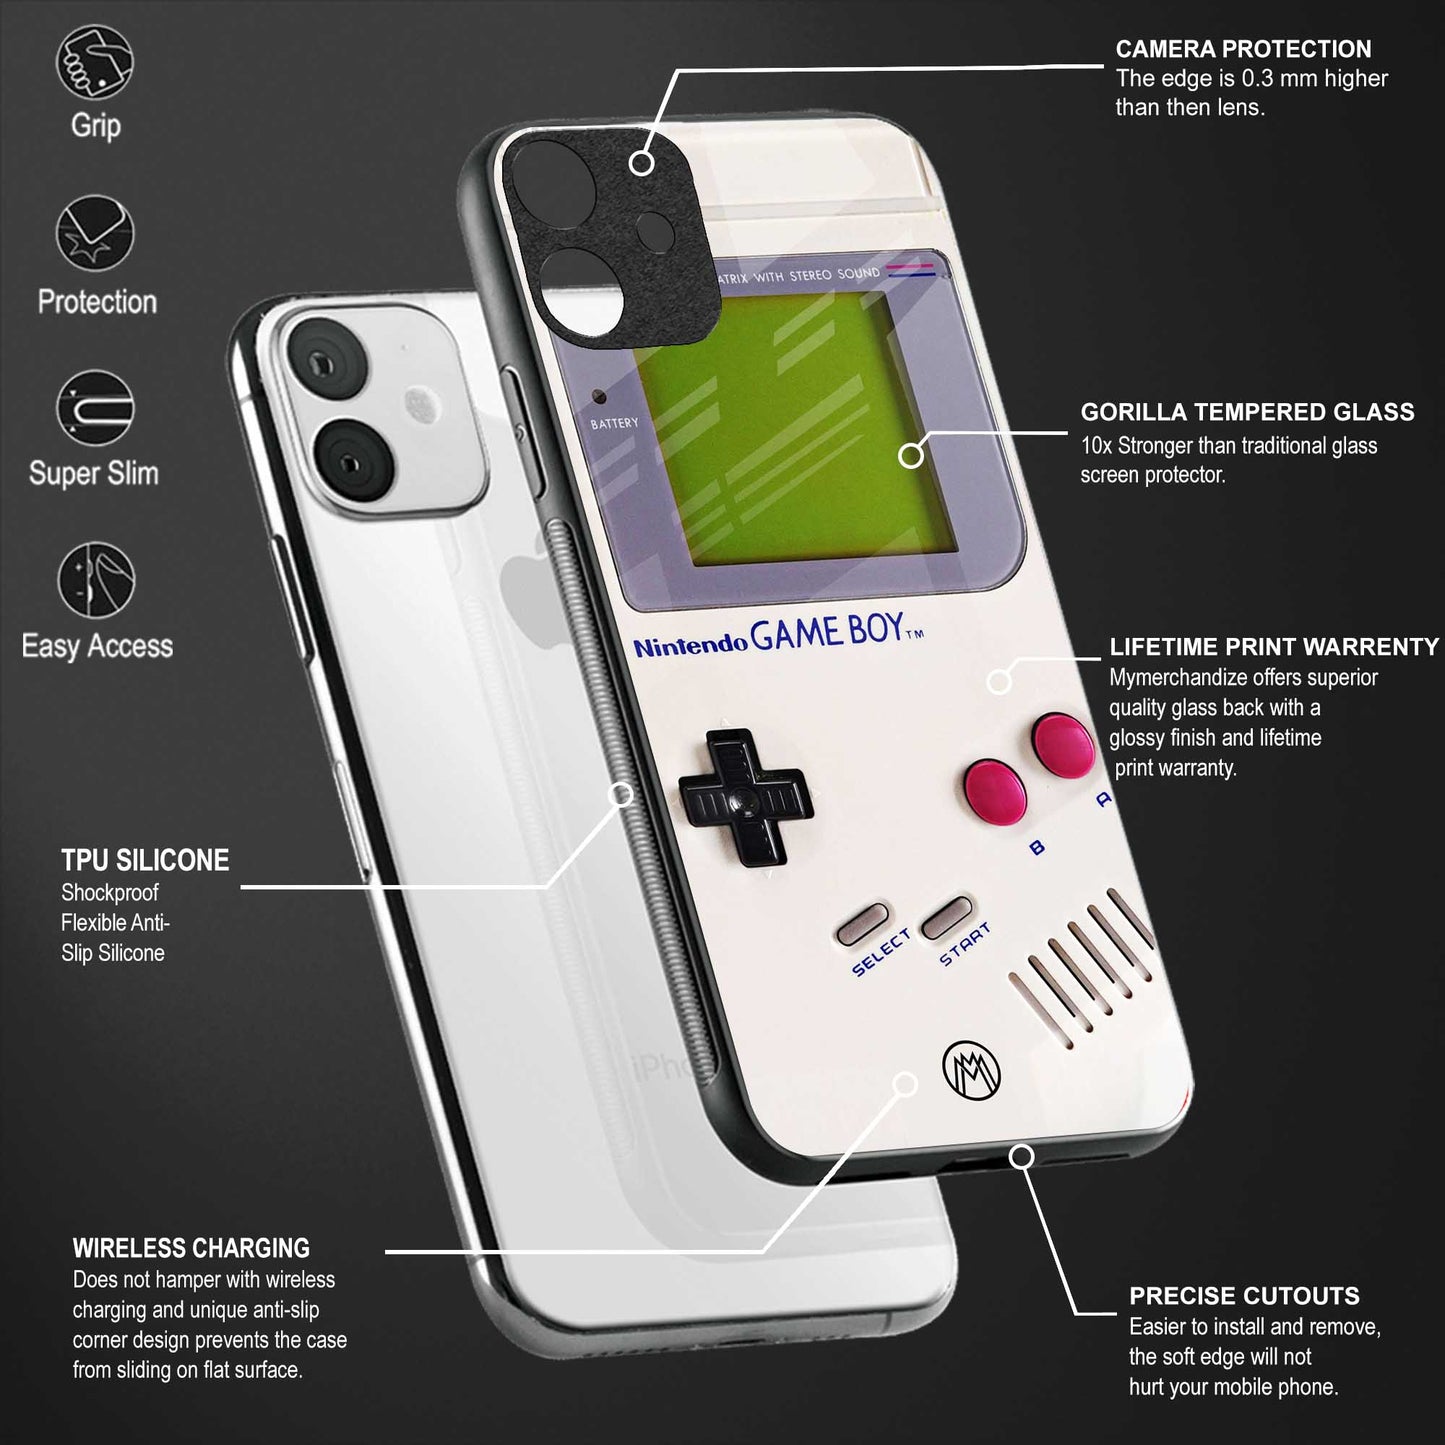 gameboy classic back phone cover | glass case for vivo y72